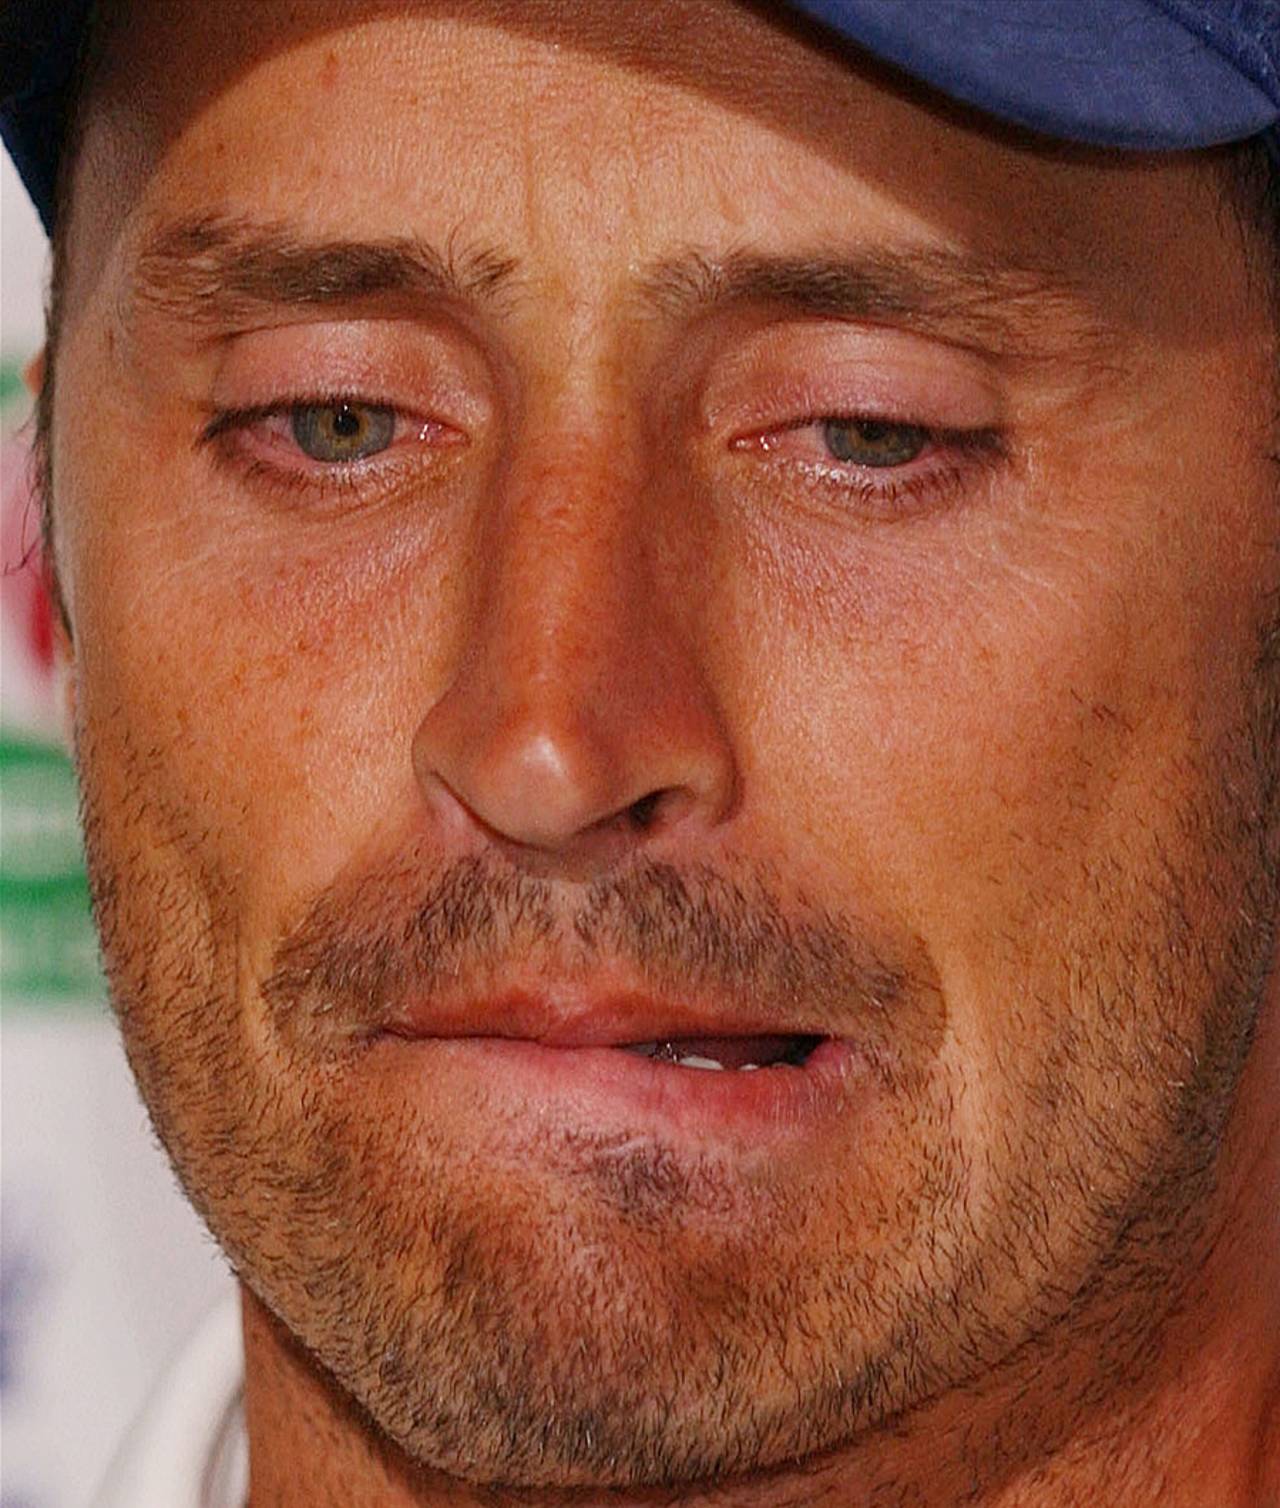 Nasser Hussain at a press conference to announce his decision to step down as captain